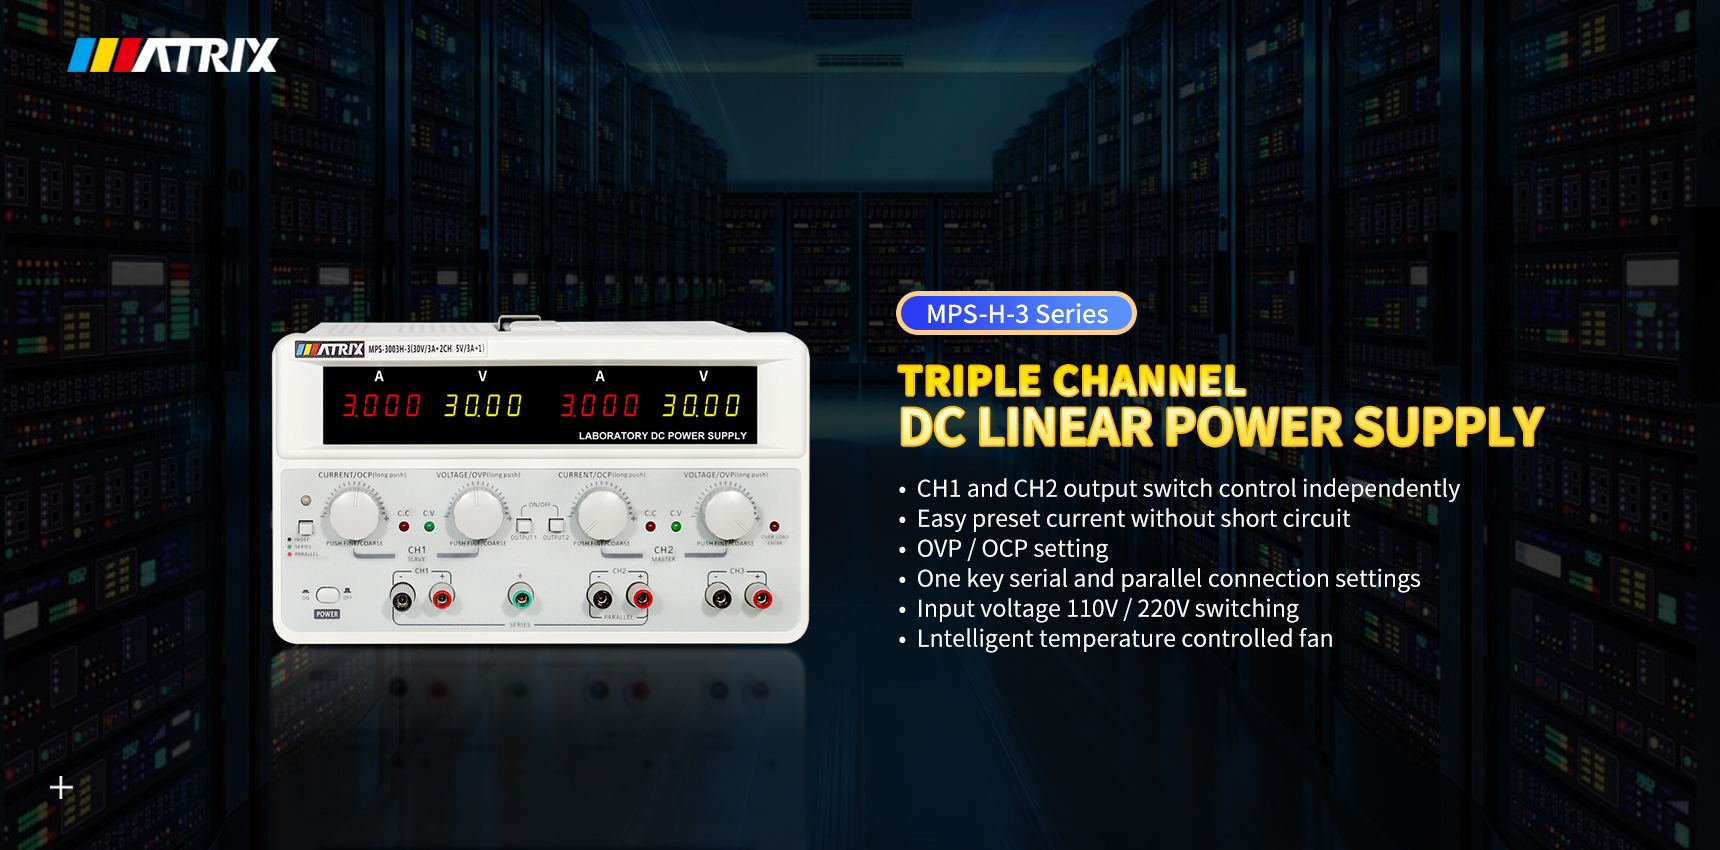 MPS-H-3 SERIES TRIPLE CHANNEL DC LINEAR POWER SUPPLY,DC POWER SUPPLY